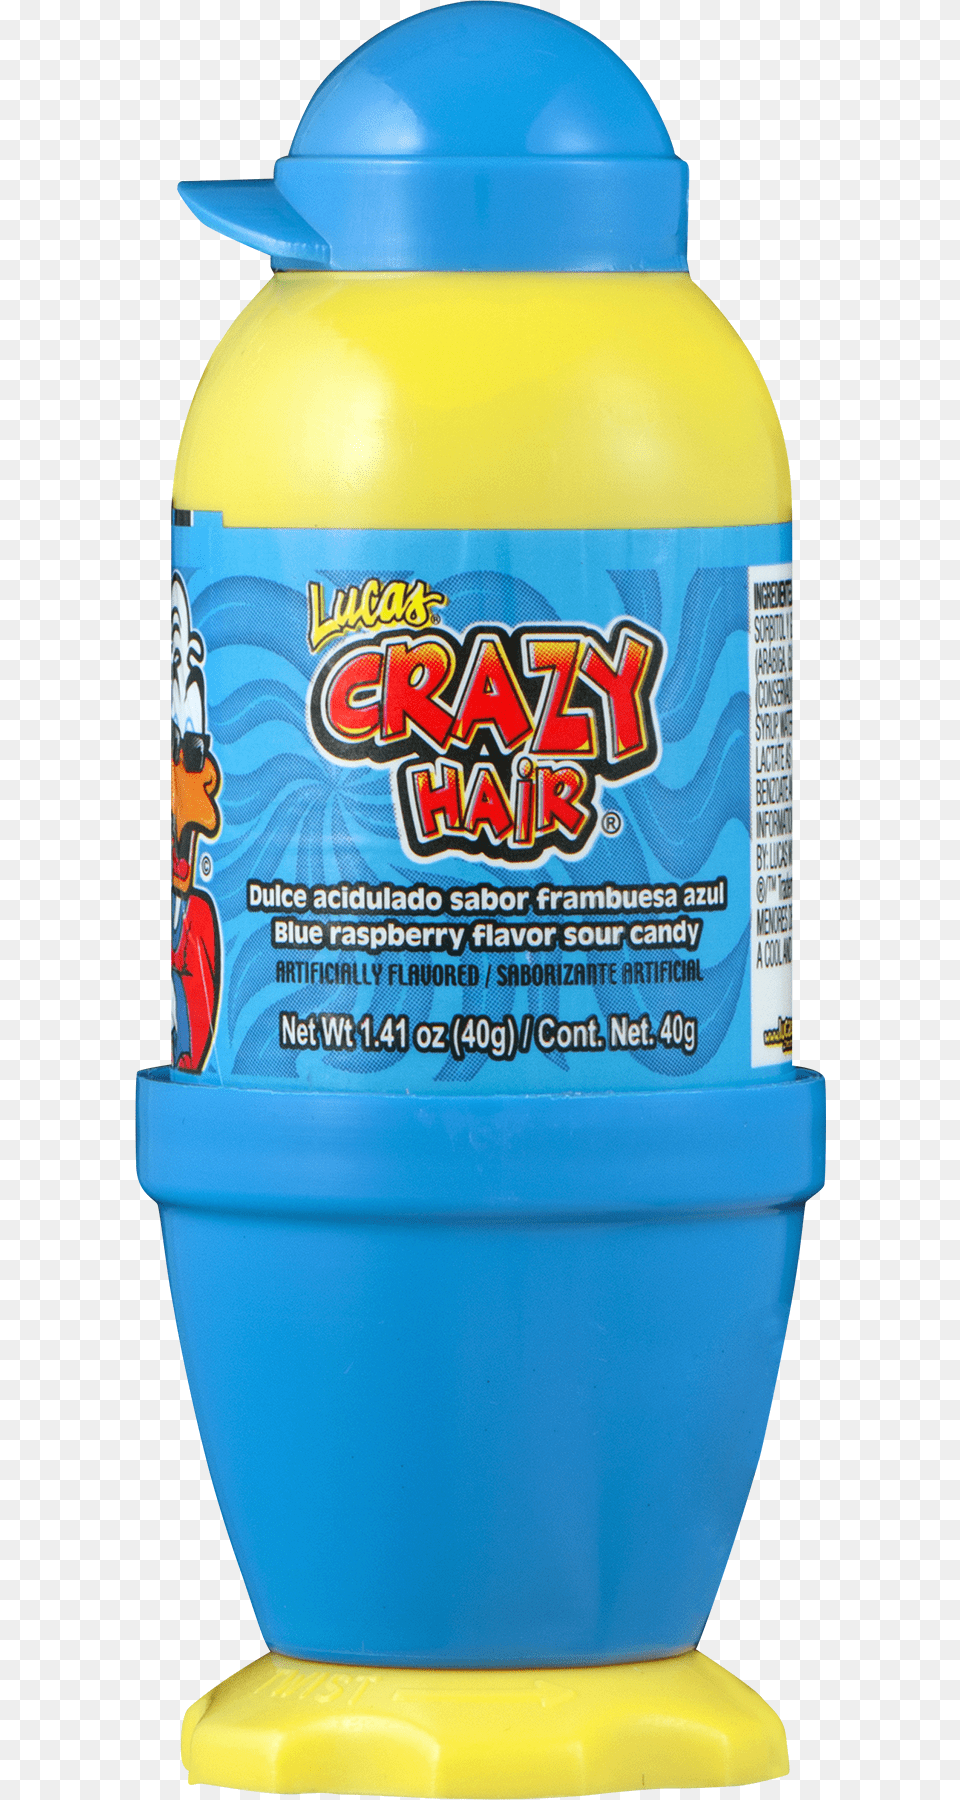 Lucas Crazy Hair Candy, Bottle, Shaker Free Transparent Png